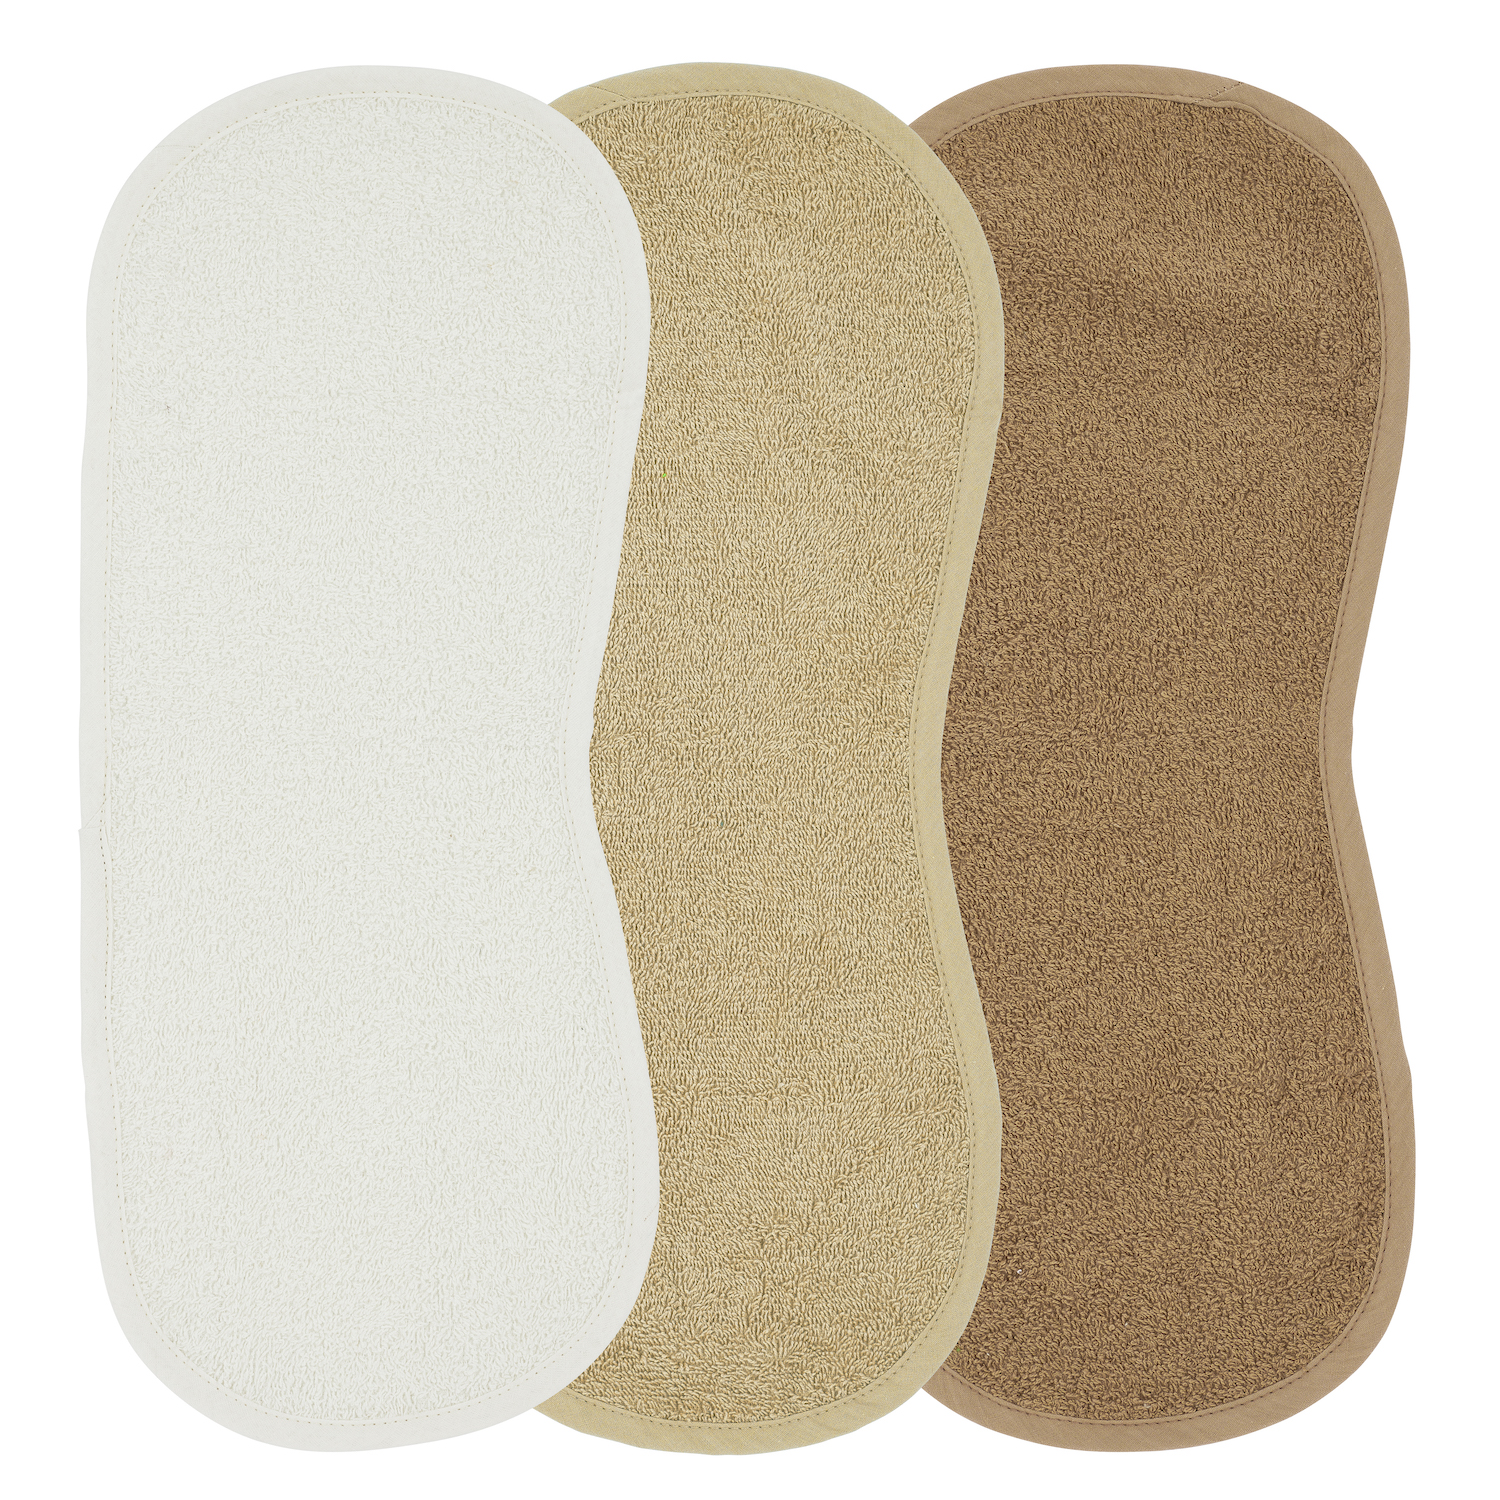 Spucktuch XL Frottee 3-pack  - Offwhite/Sand/Toffee - 53x20cm